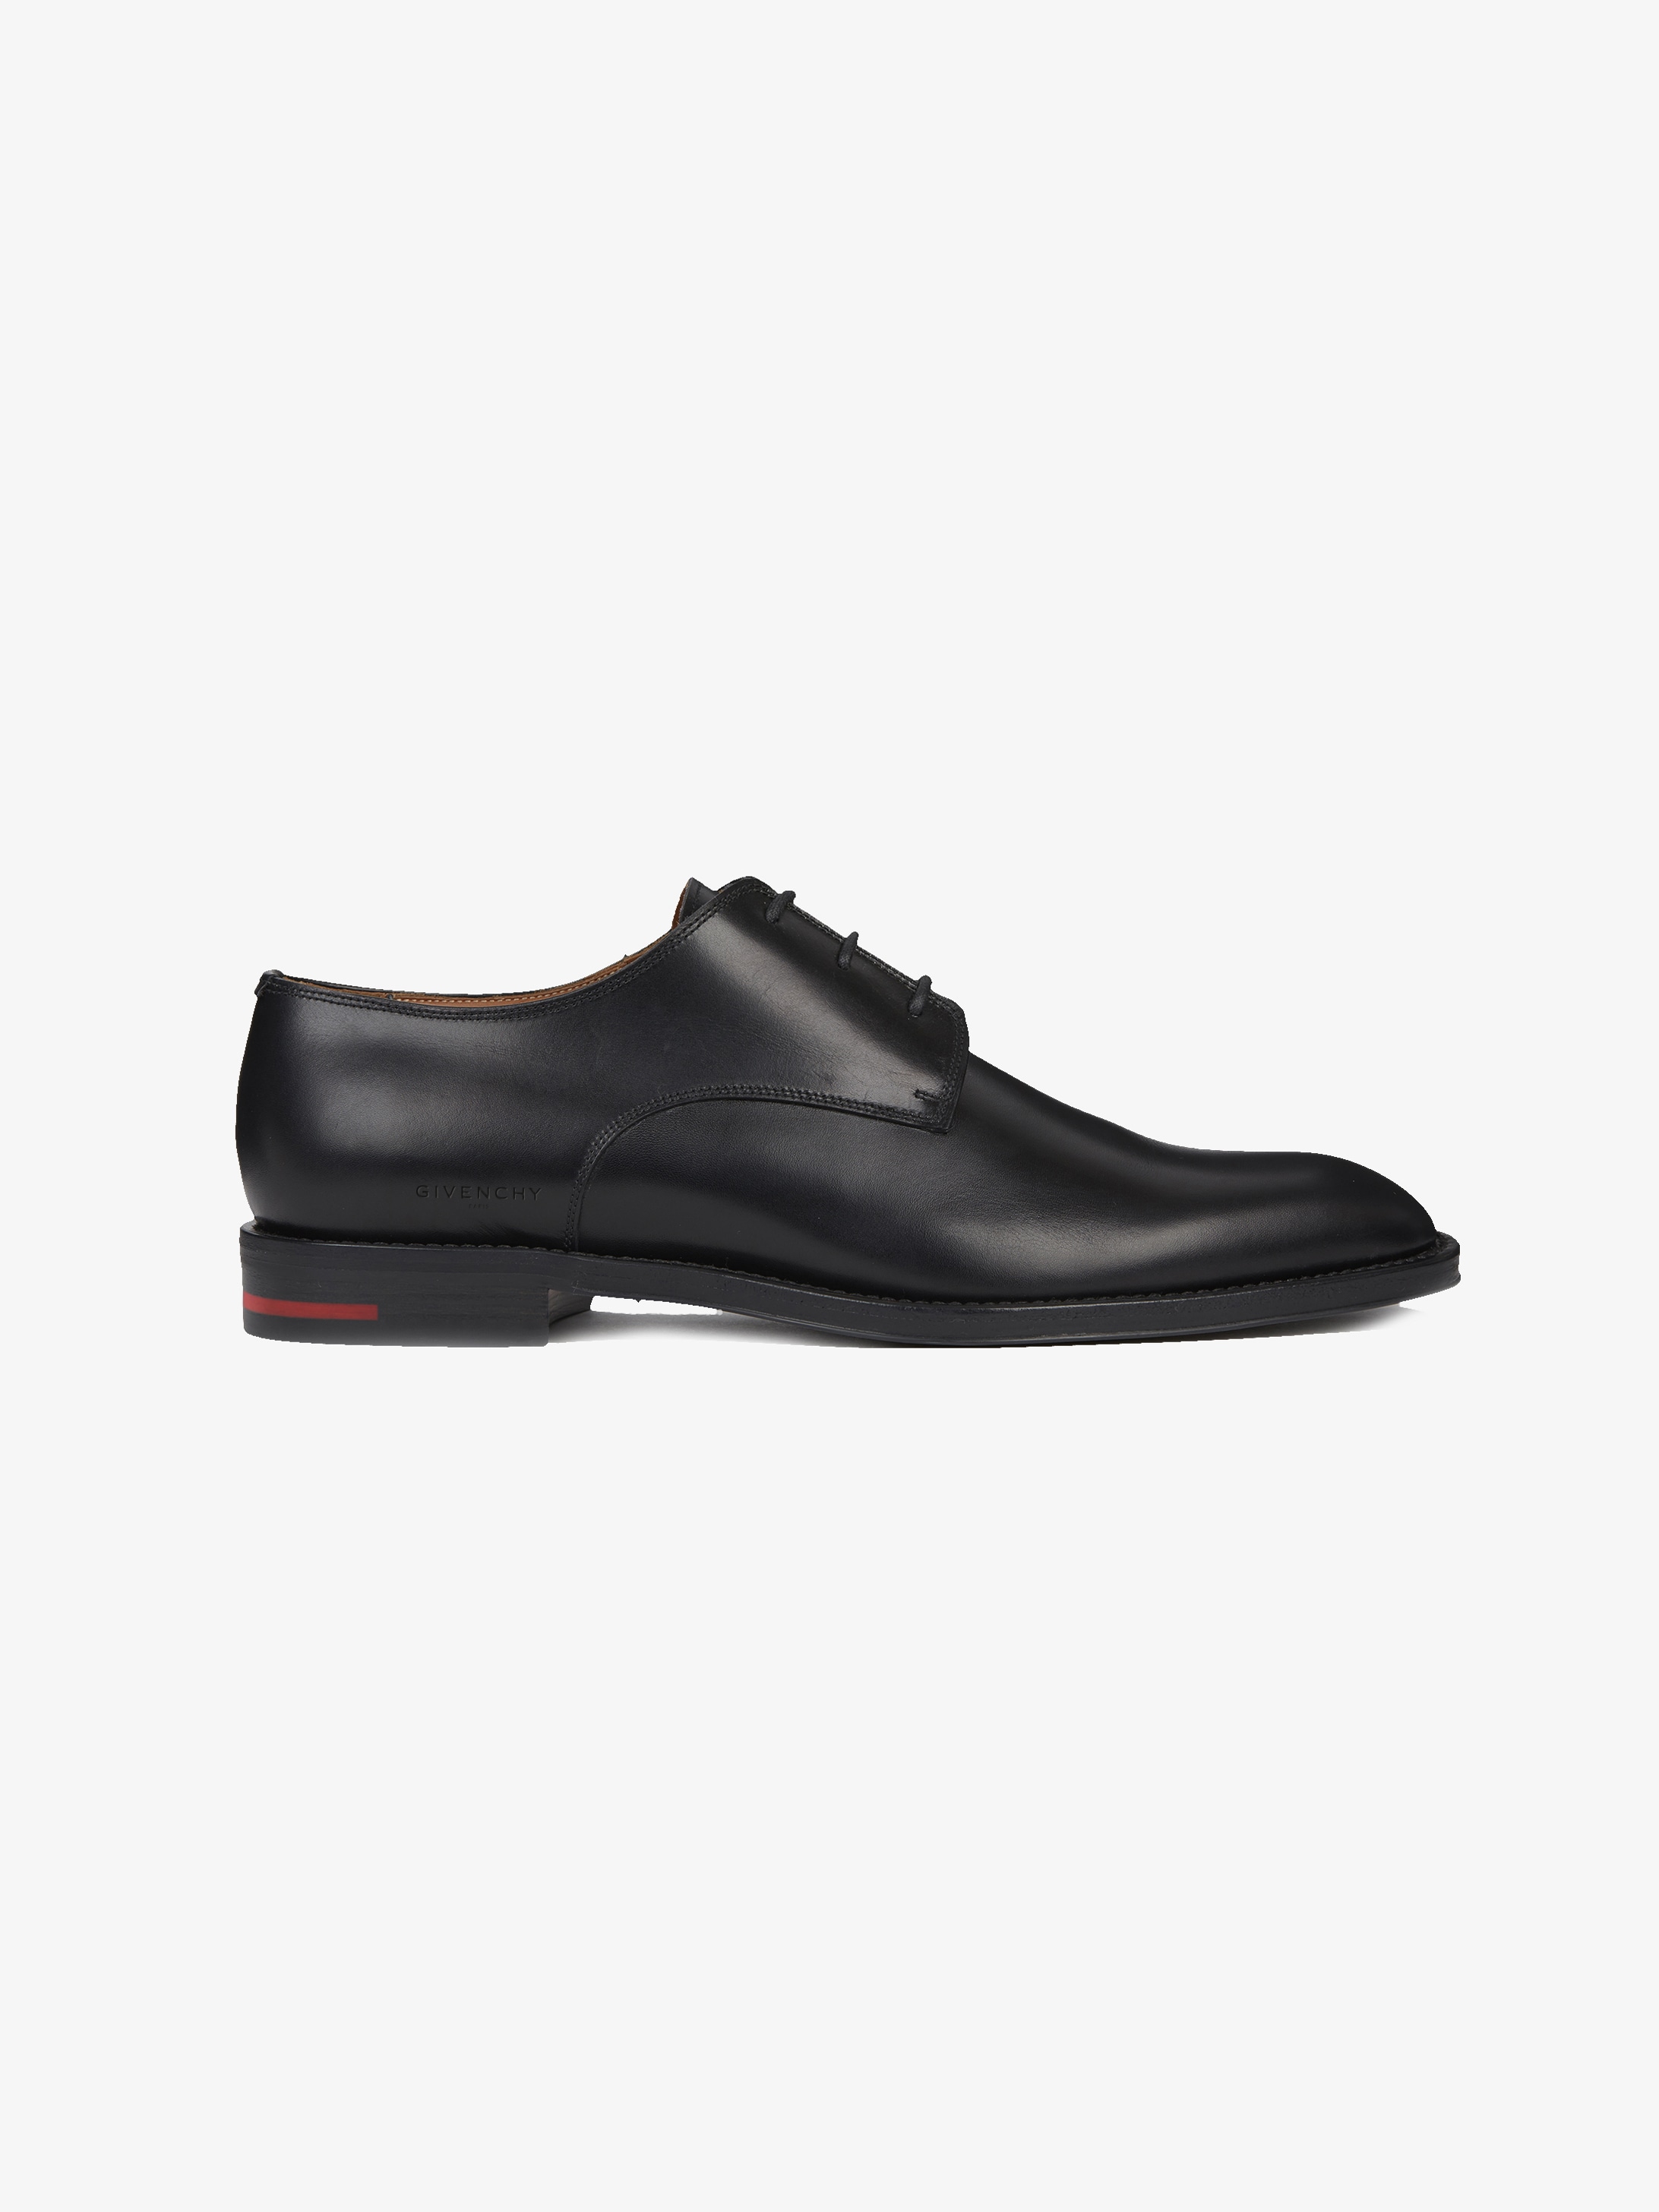 givenchy dress shoes